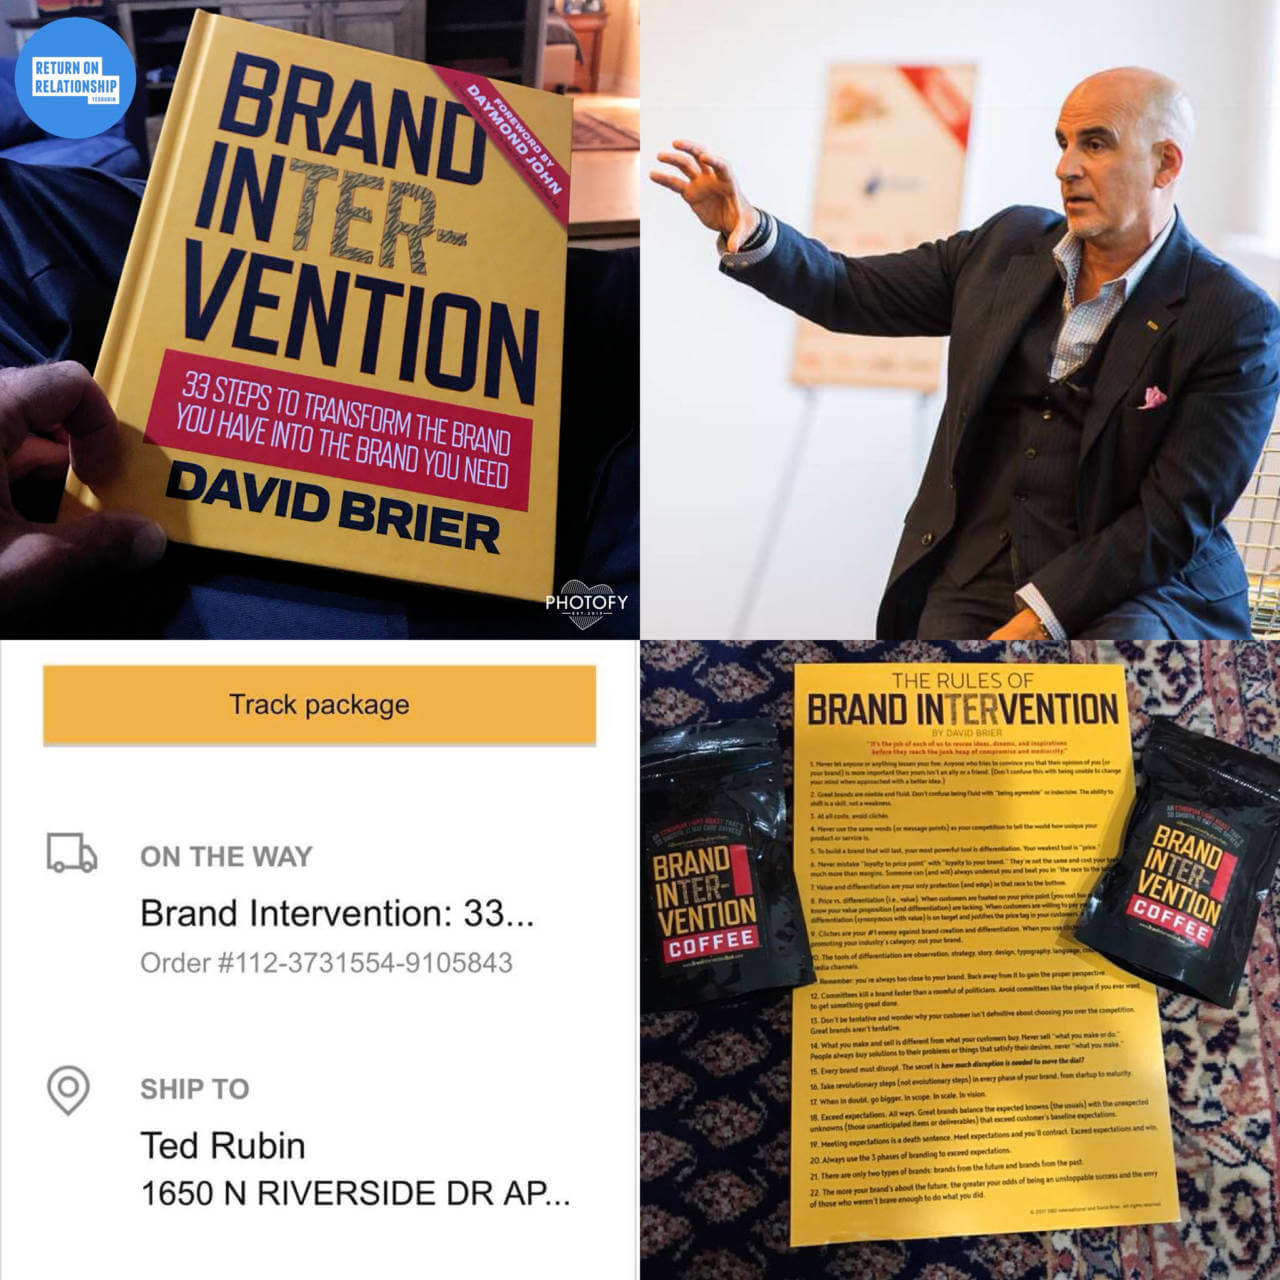 Brand Intervention and a Book owner start a movement